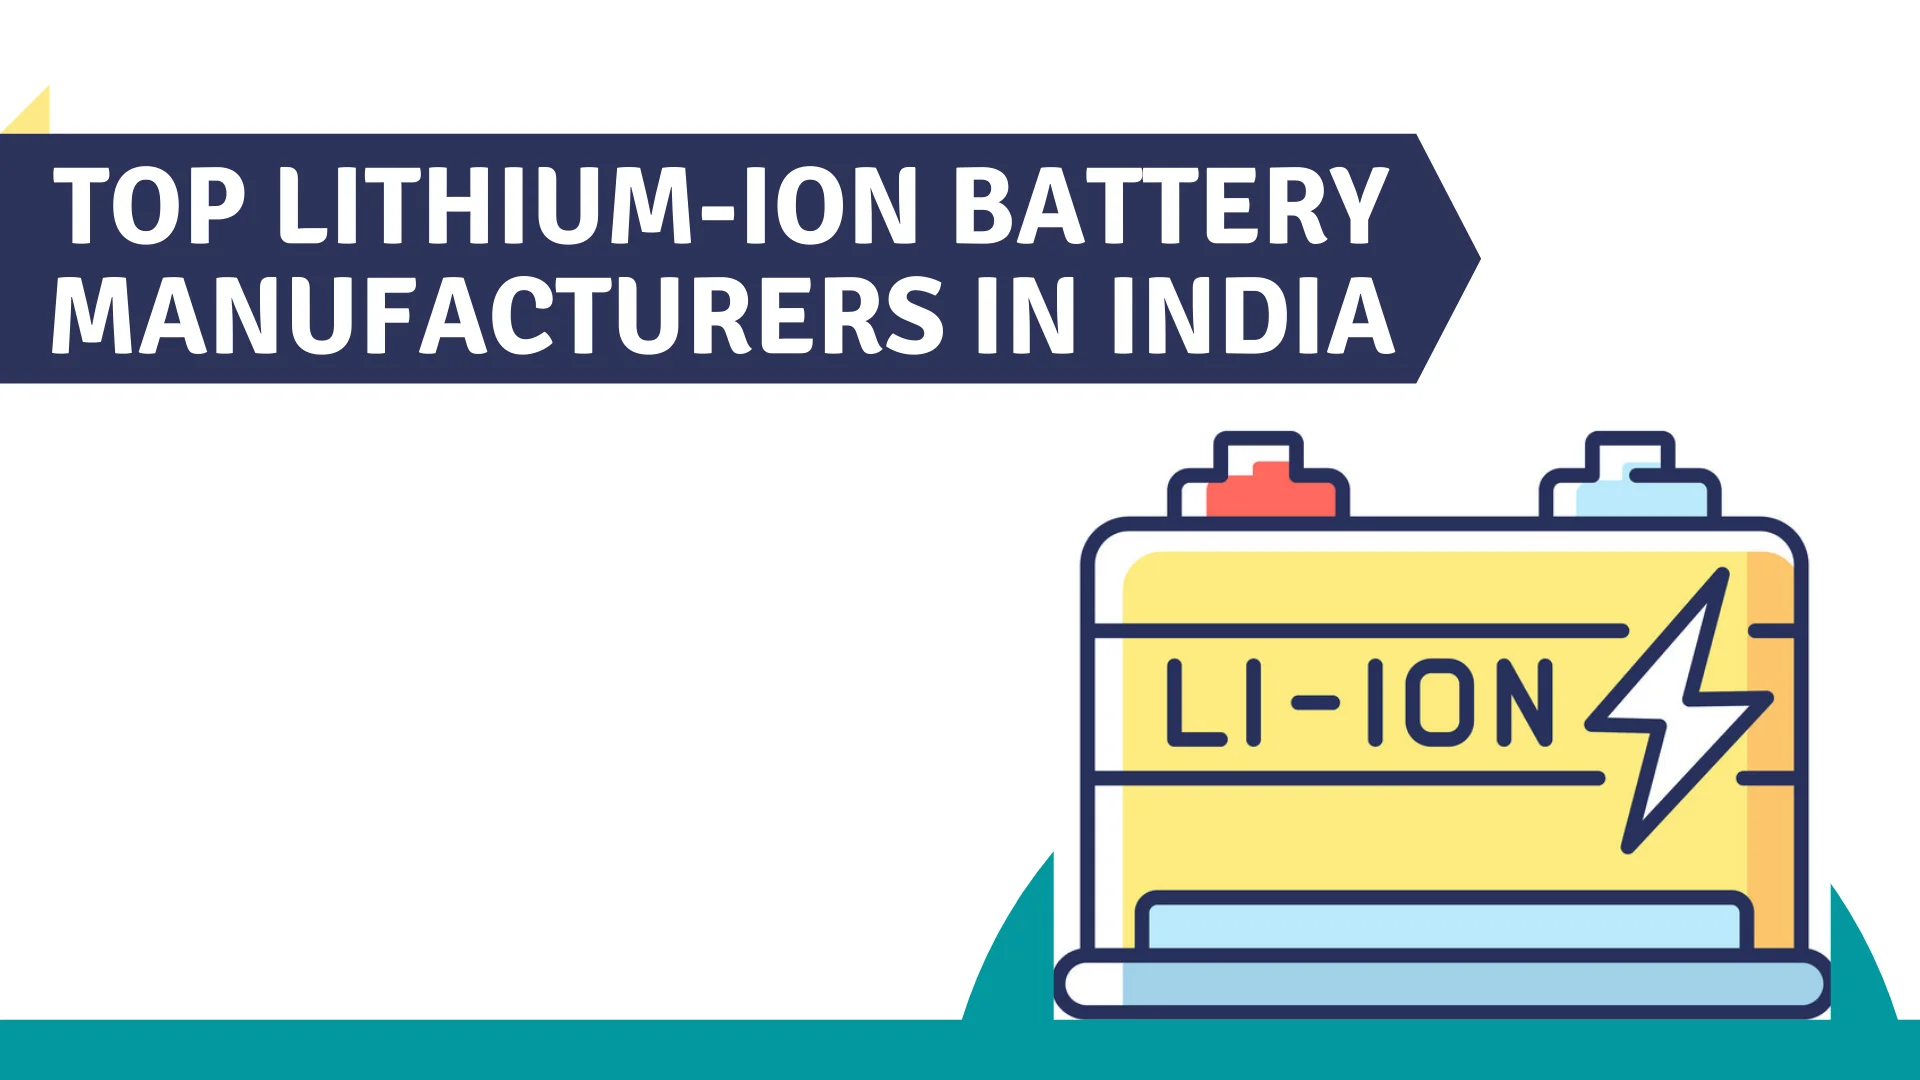 https://e-vehicleinfo.com/indias-largest-lithium-ion-battery-manufacturers/